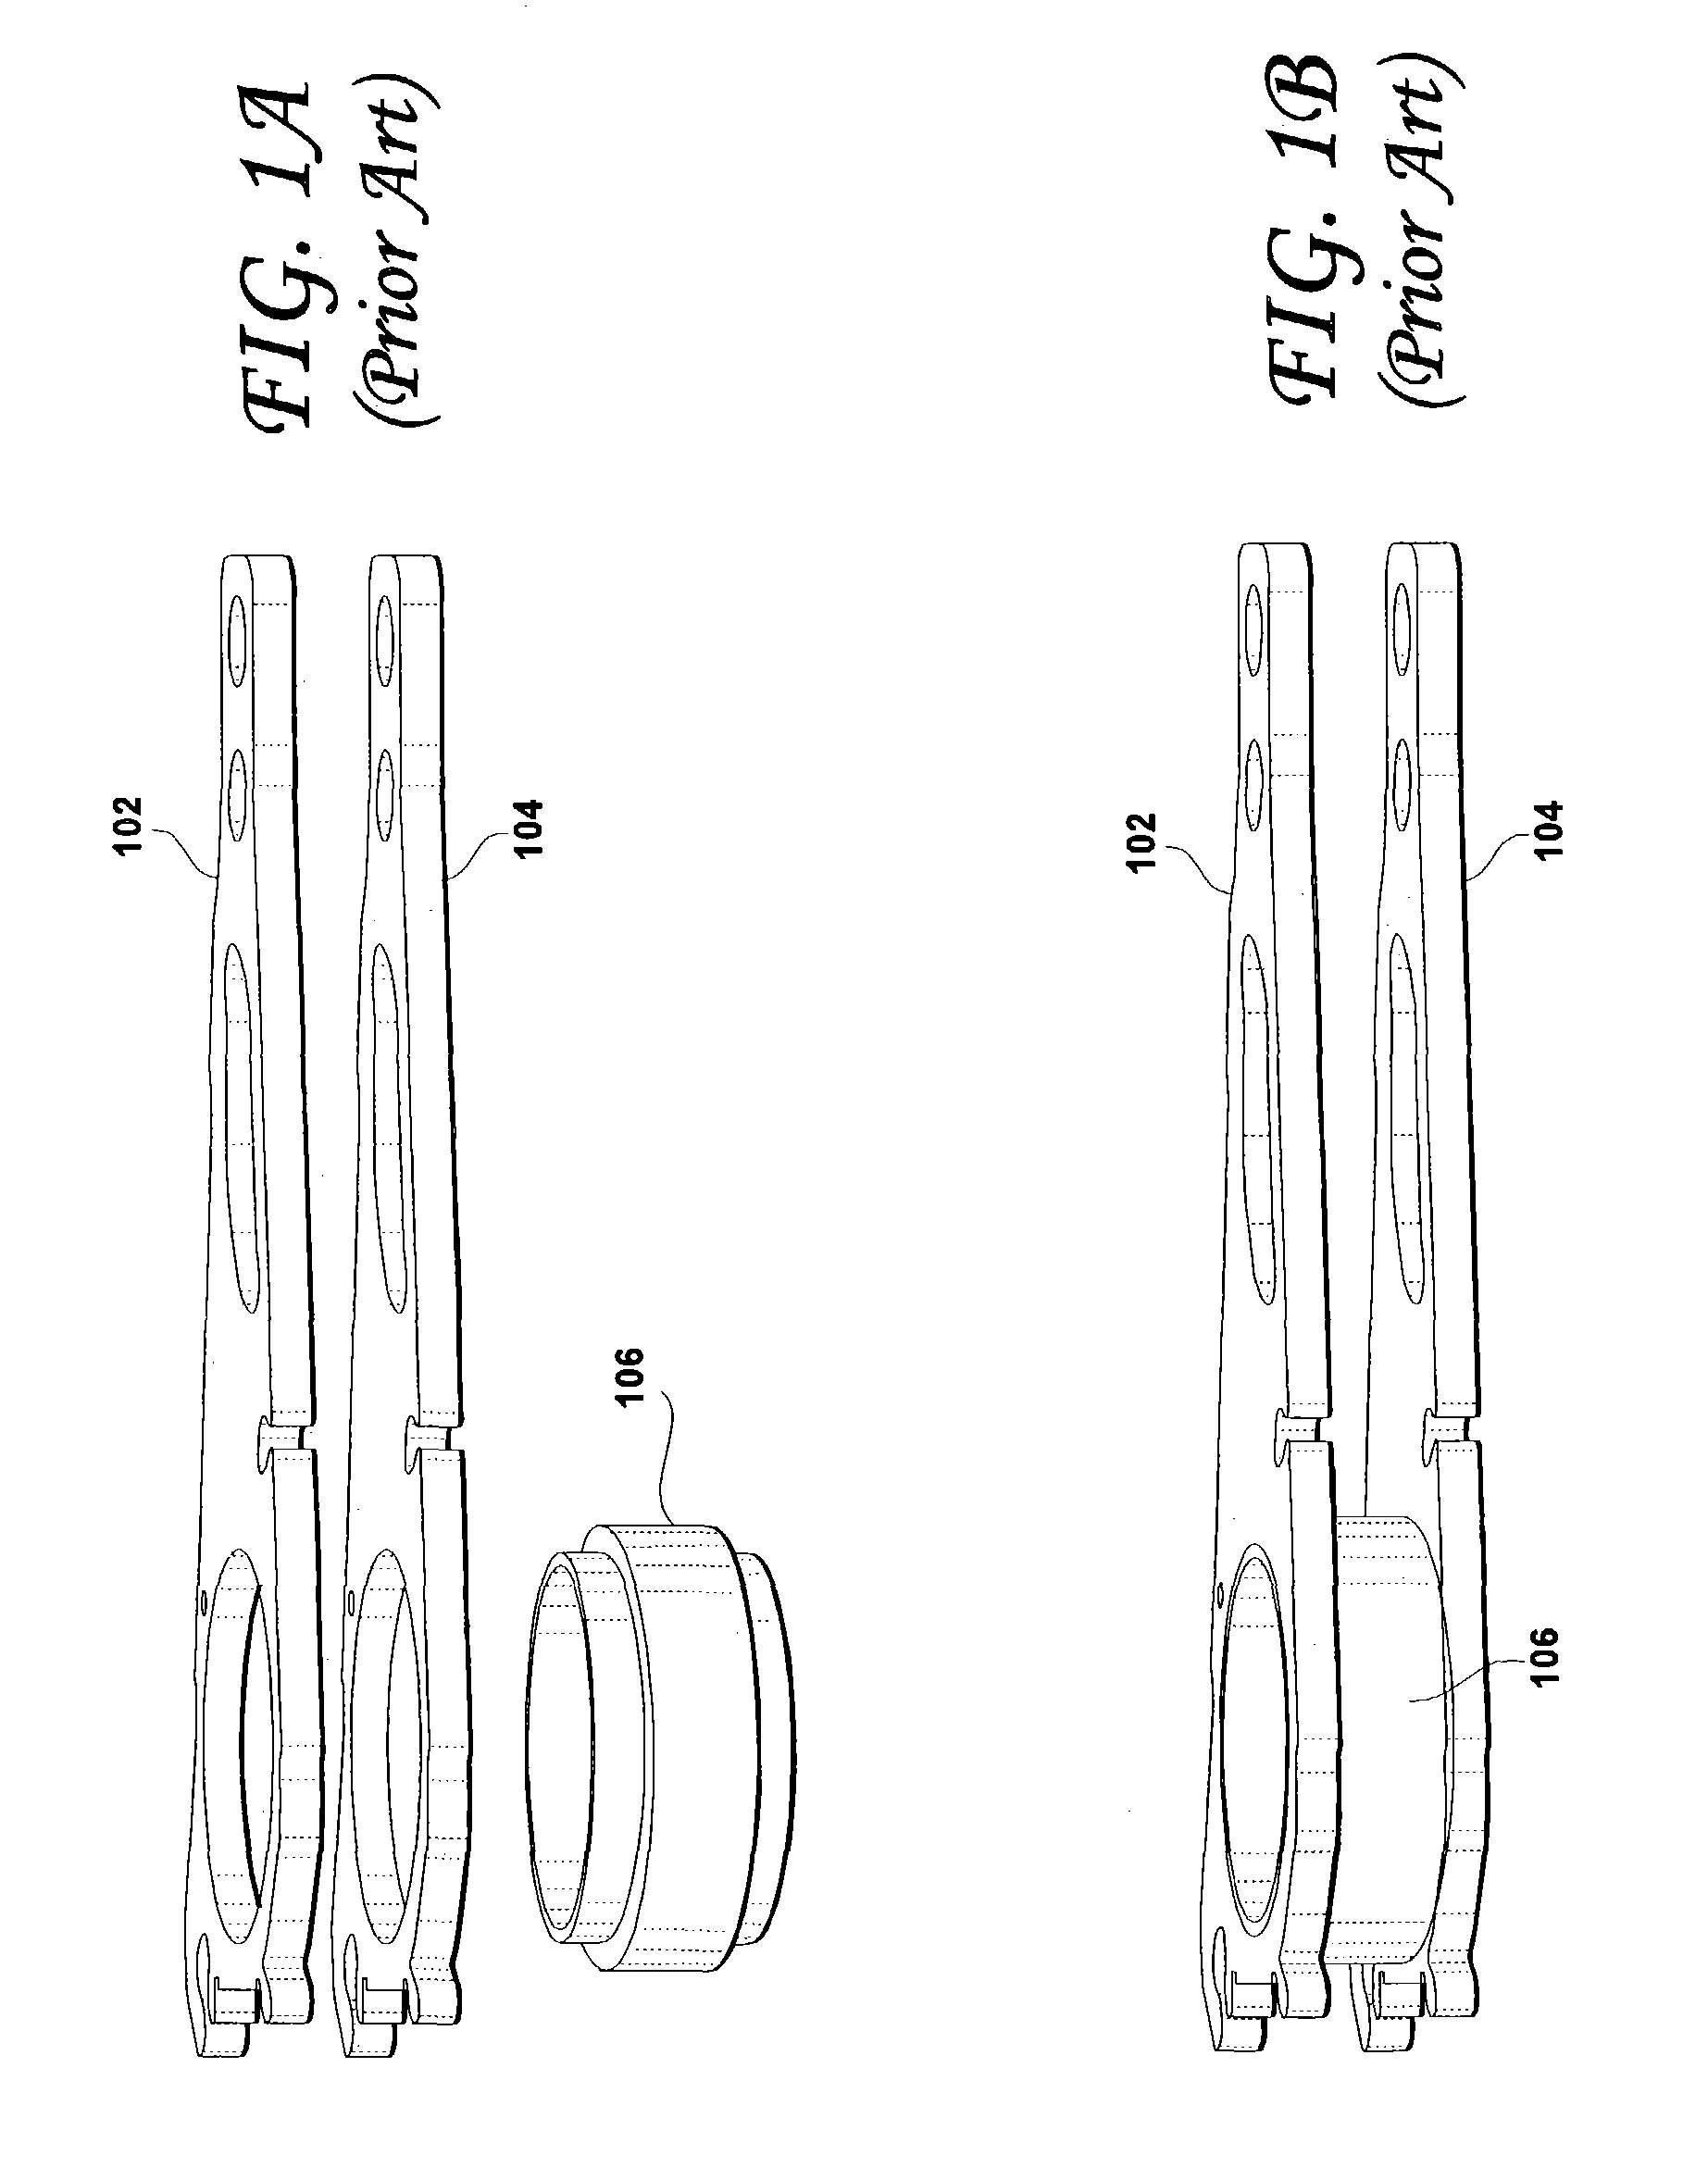 Disk drive including a one-piece stamped actuator arm assembly and method of making same